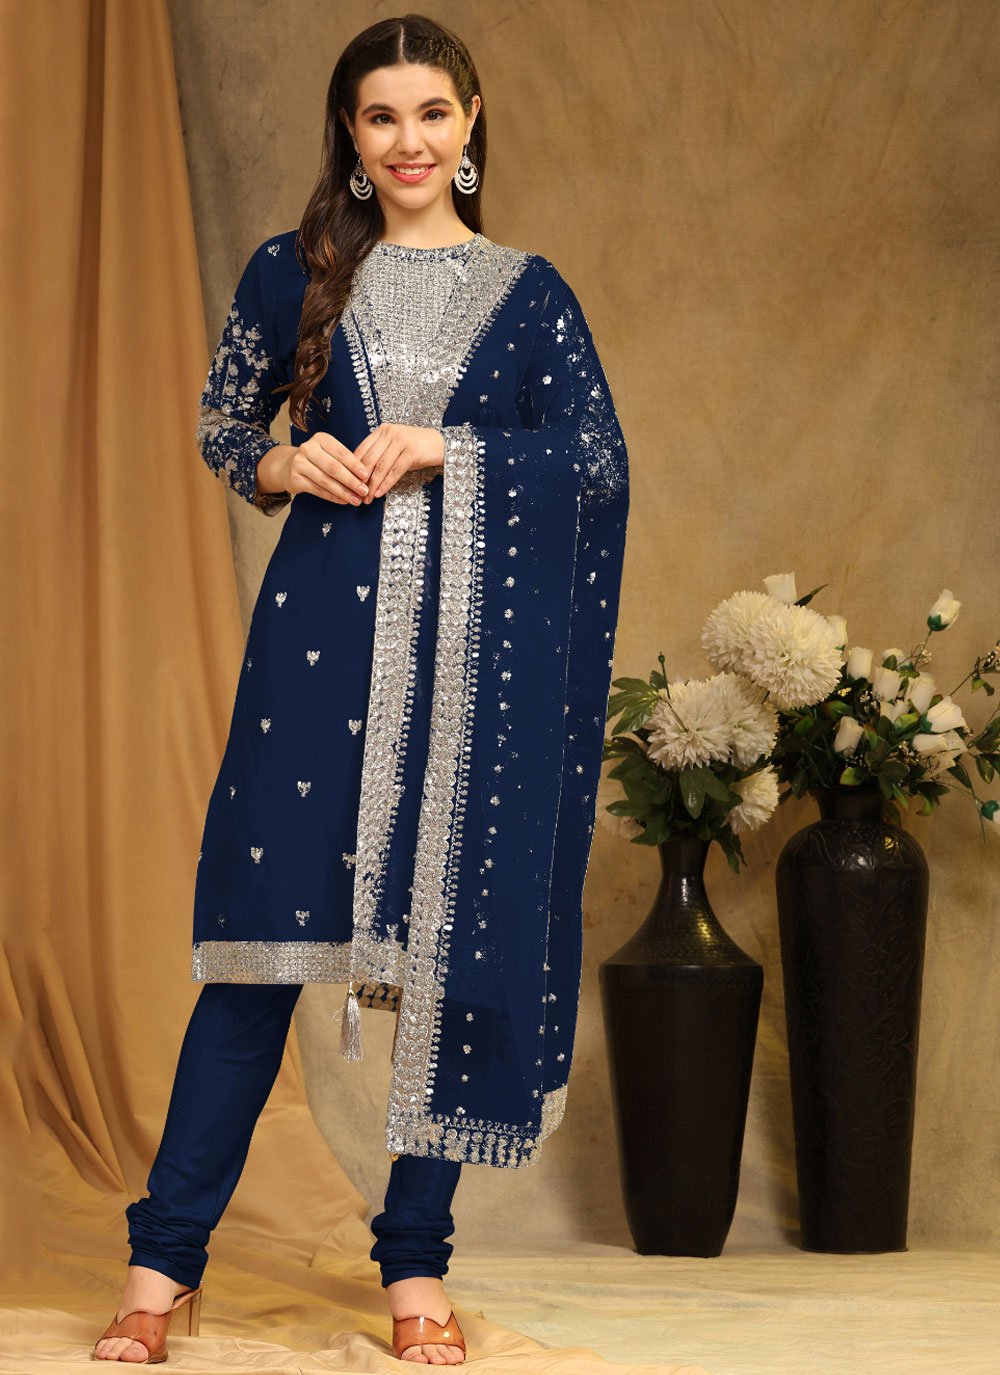 Salwar Kameez for Women: Features, Size Chart and Fashion Trends